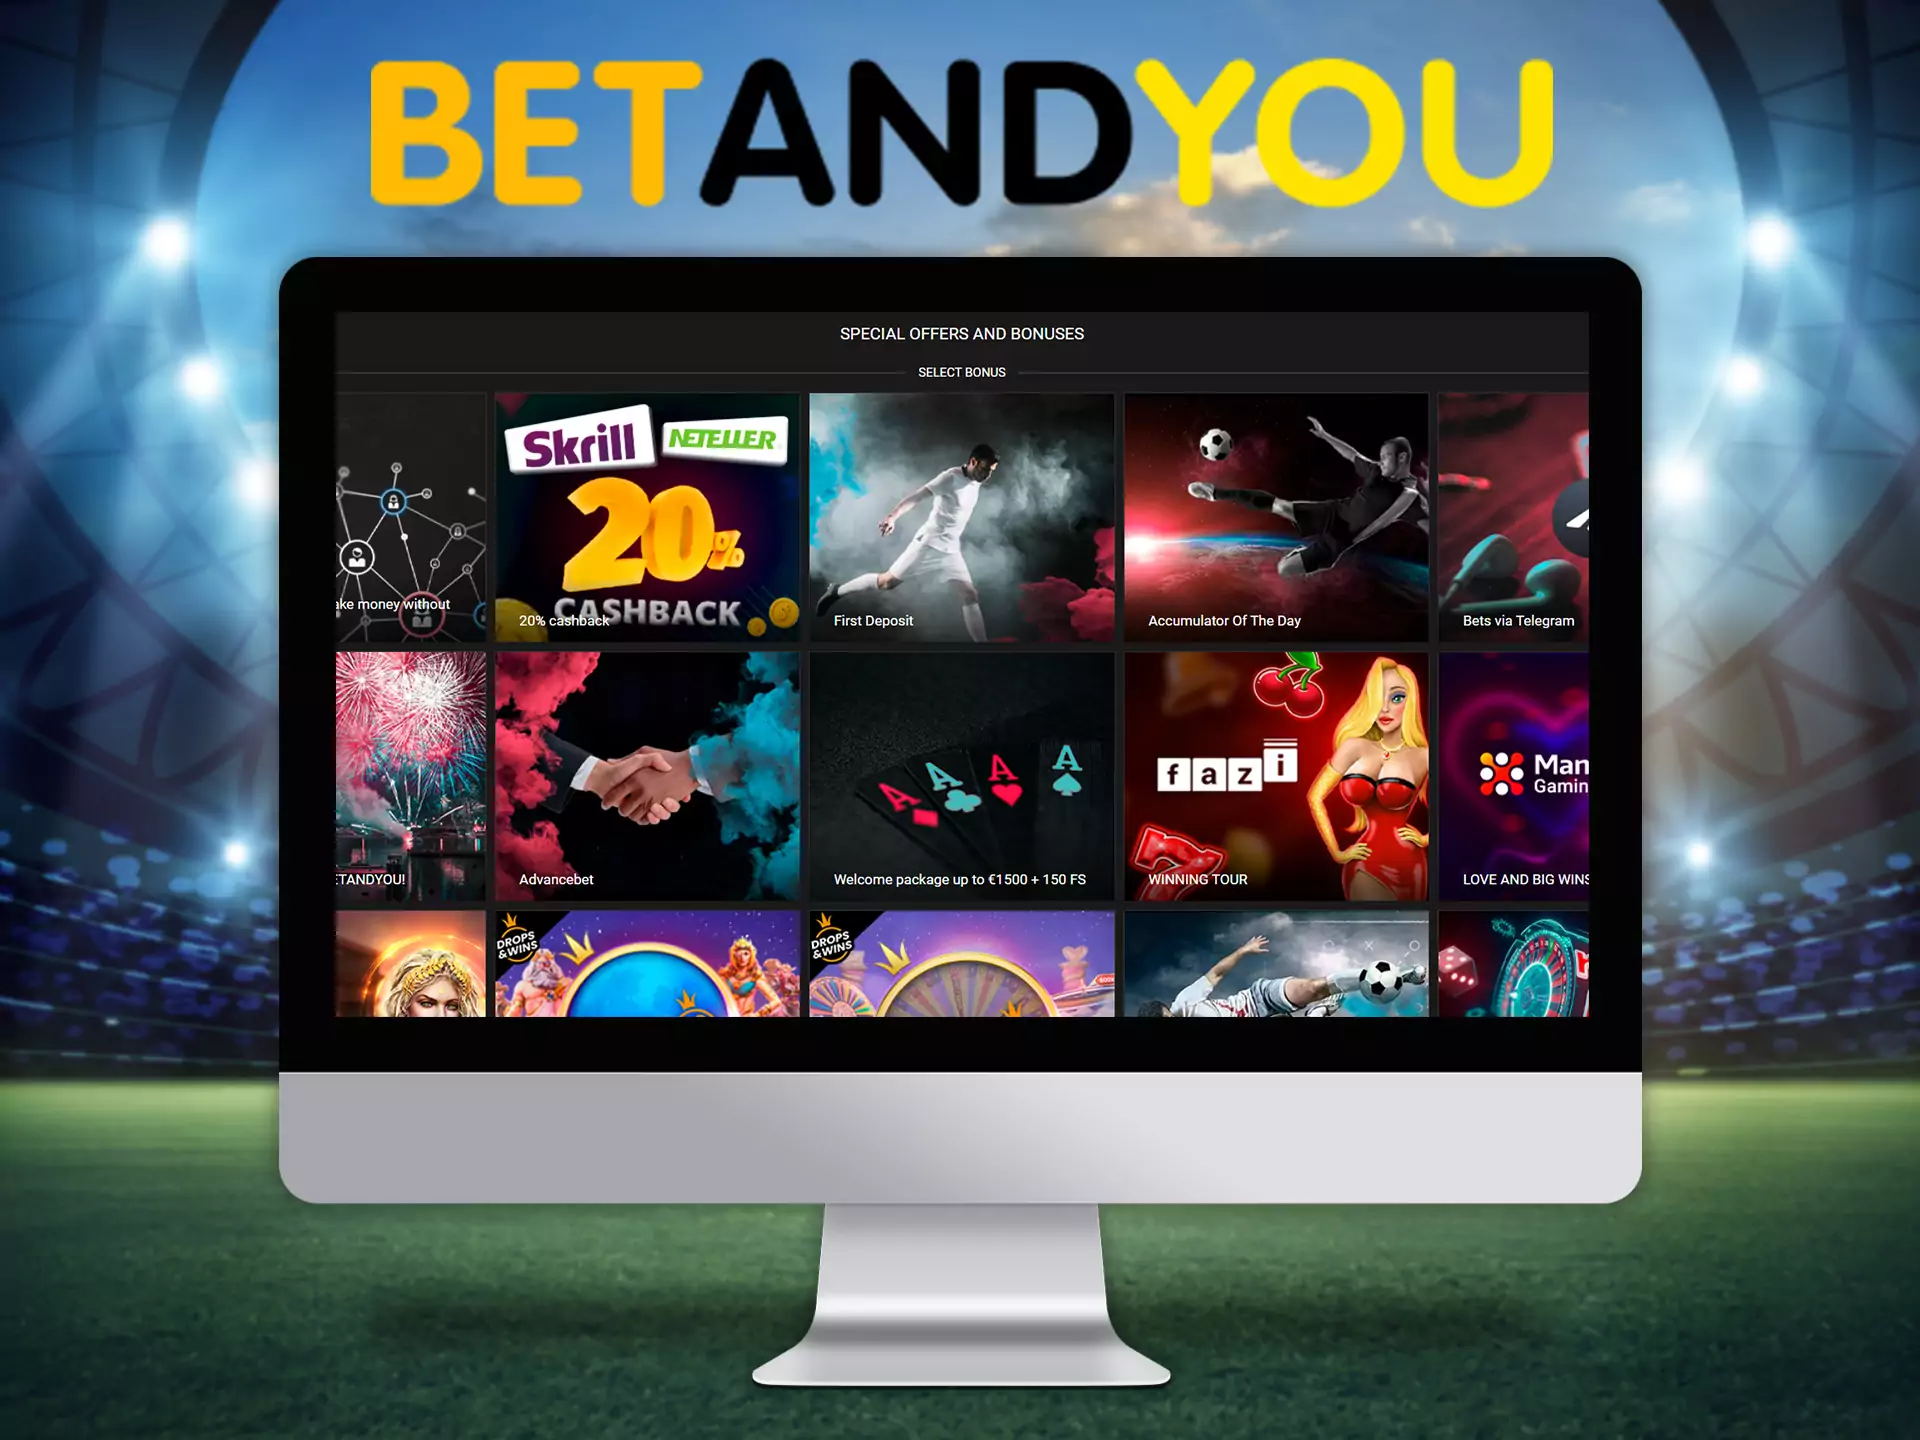 BetAndYou offers lucrative bonuses for new players.